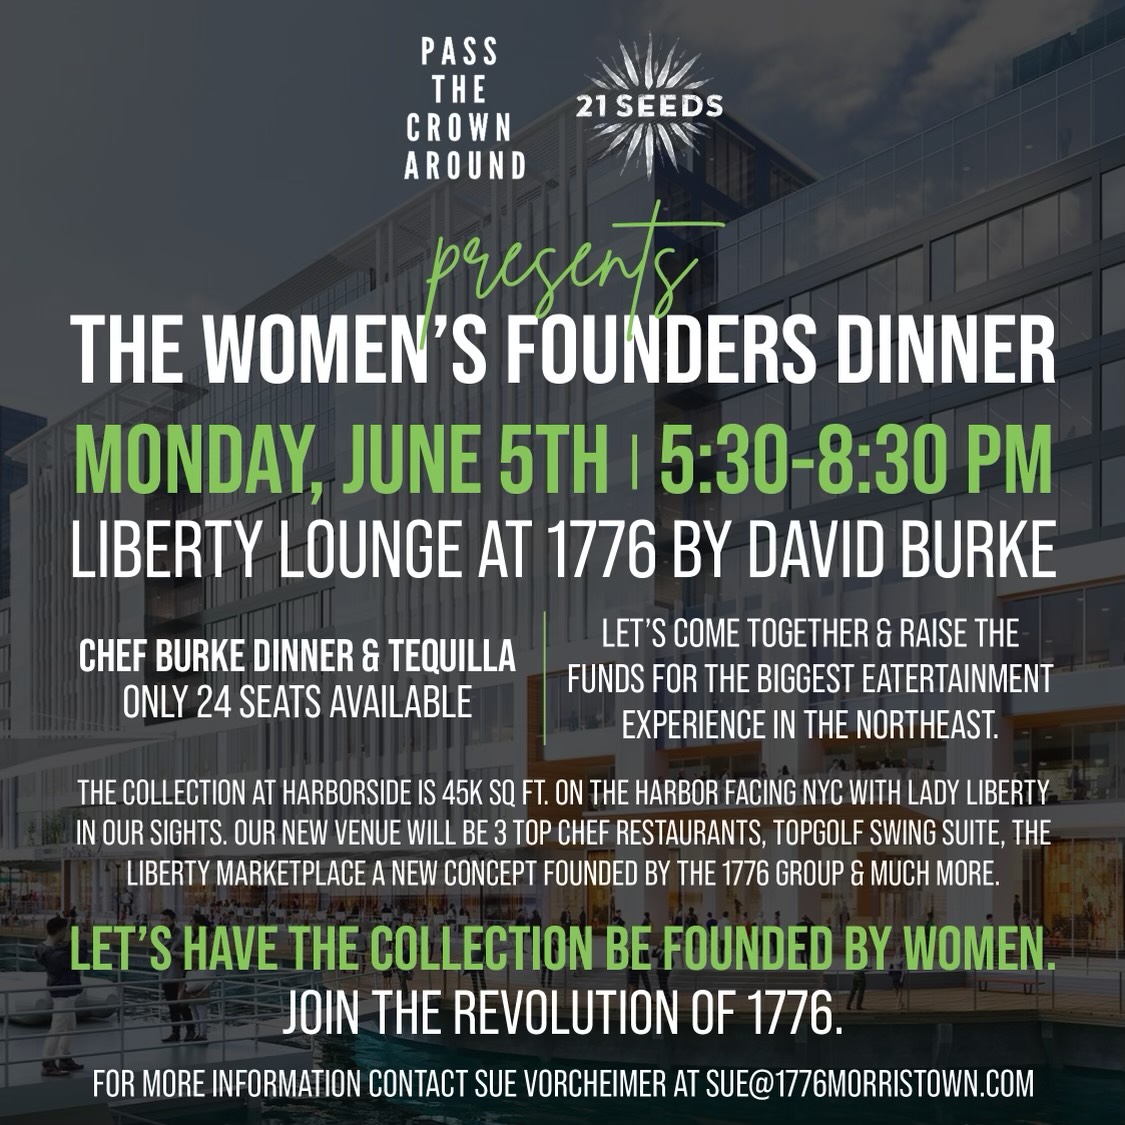 1776 CONNECTS FOUNDERS DINNER